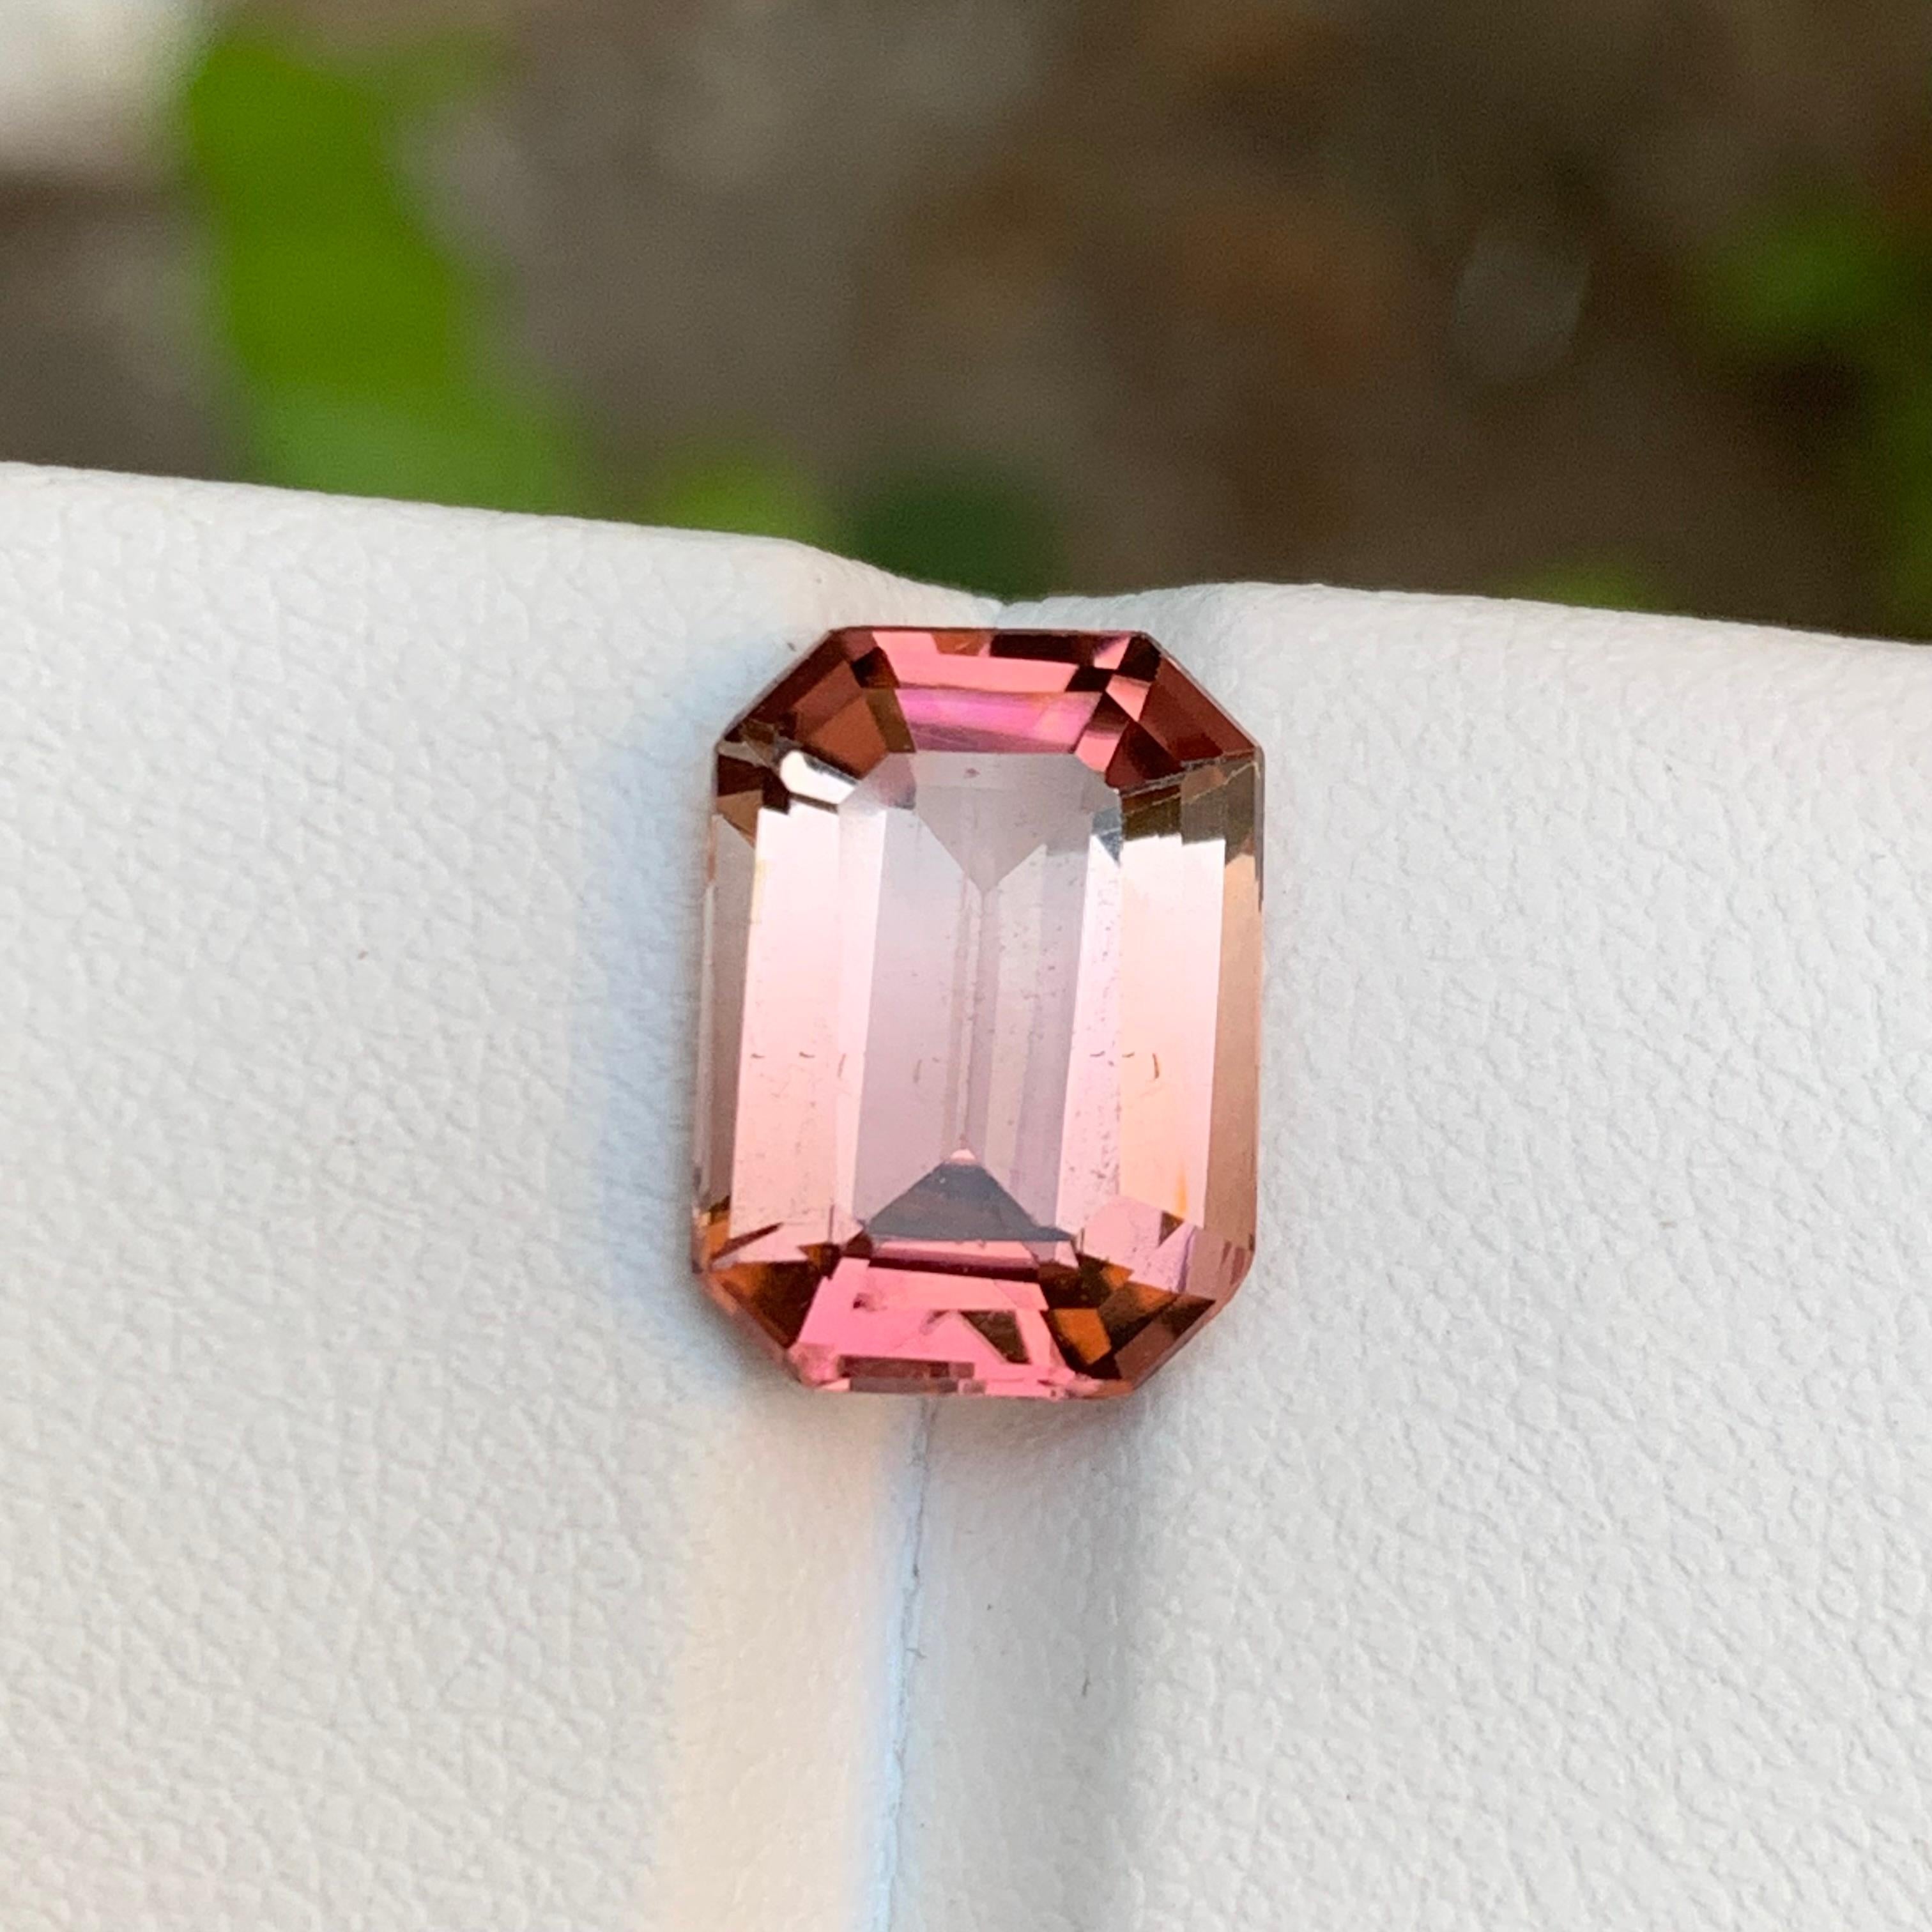 GEMSTONE TYPE: Tourmaline
PIECE(S): 1
WEIGHT: 4.80 Carats
SHAPE: Emerald Cut
SIZE (MM): 12.49 x 8.95 x 5.53
COLOR: Peachy Pink Bicolor
CLARITY: 95% Eye Clean
TREATMENT: None
ORIGIN: Africa
CERTIFICATE: On demand
(if you require a certificate, kindly